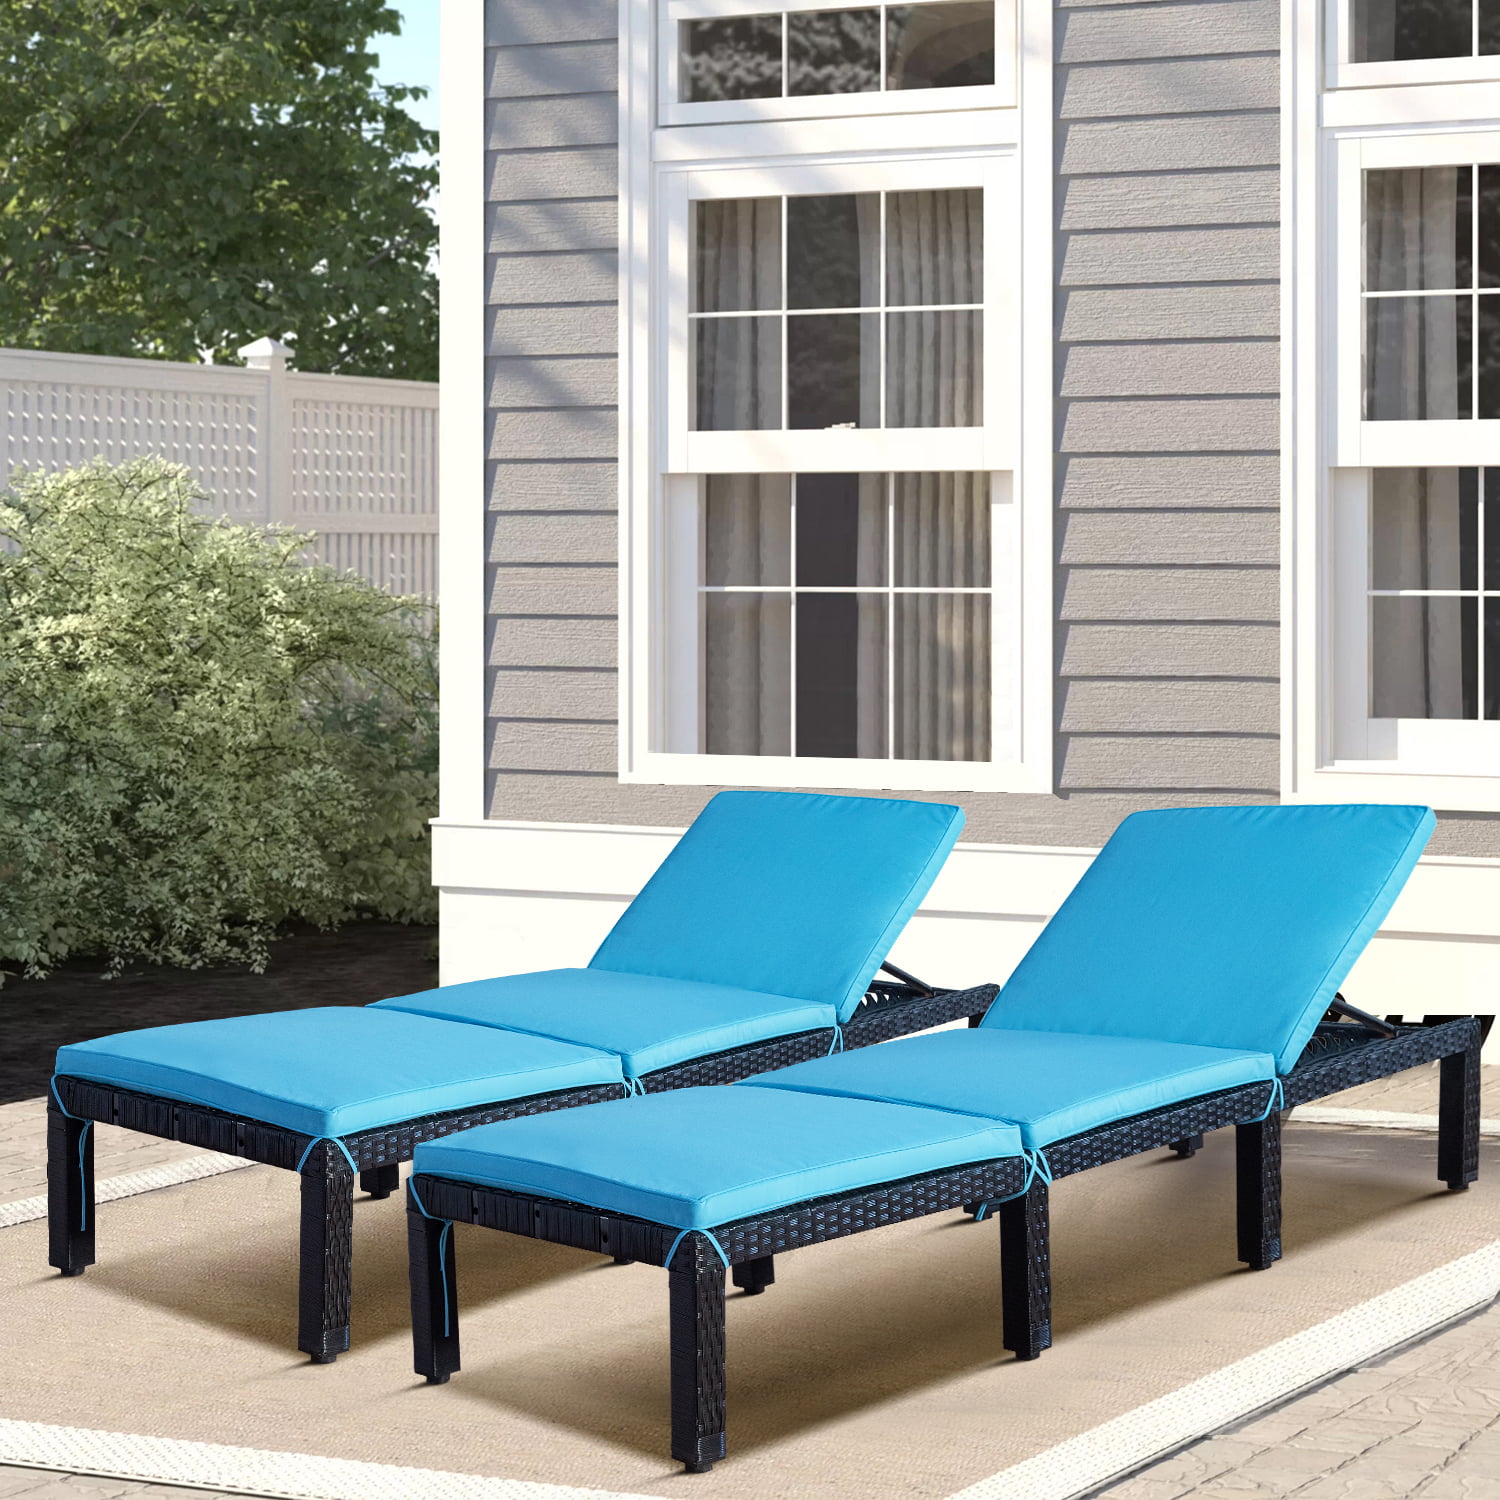 Patio Chaise Lounge, Set of 2 Patio Chaise Lounge Chairs Furniture Set